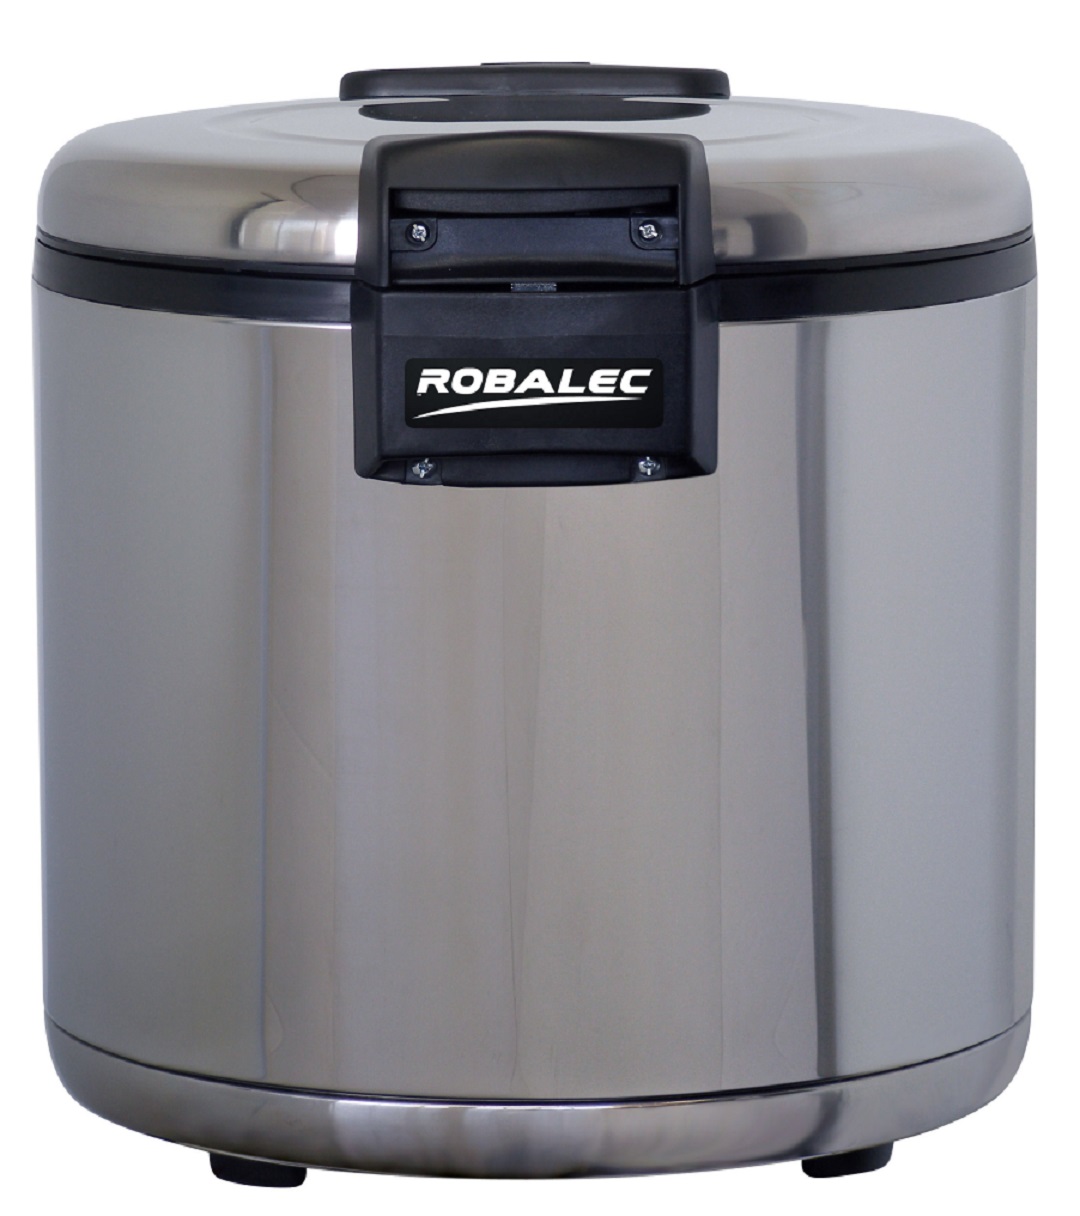 Roband Robalec 5RSW10000 55 Portion Rice Cooker